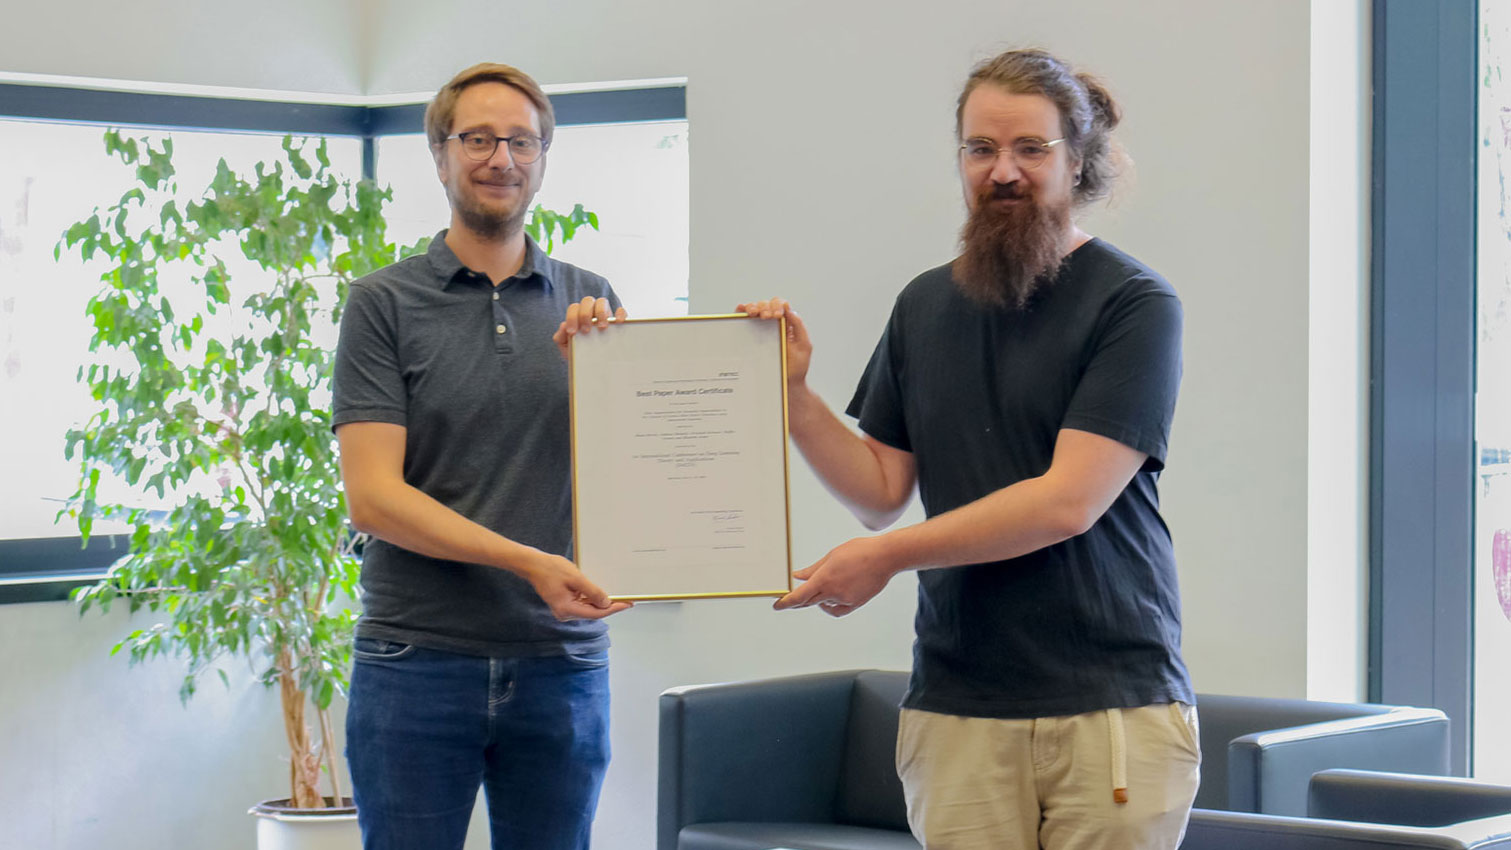 Best Paper Award for AI research 